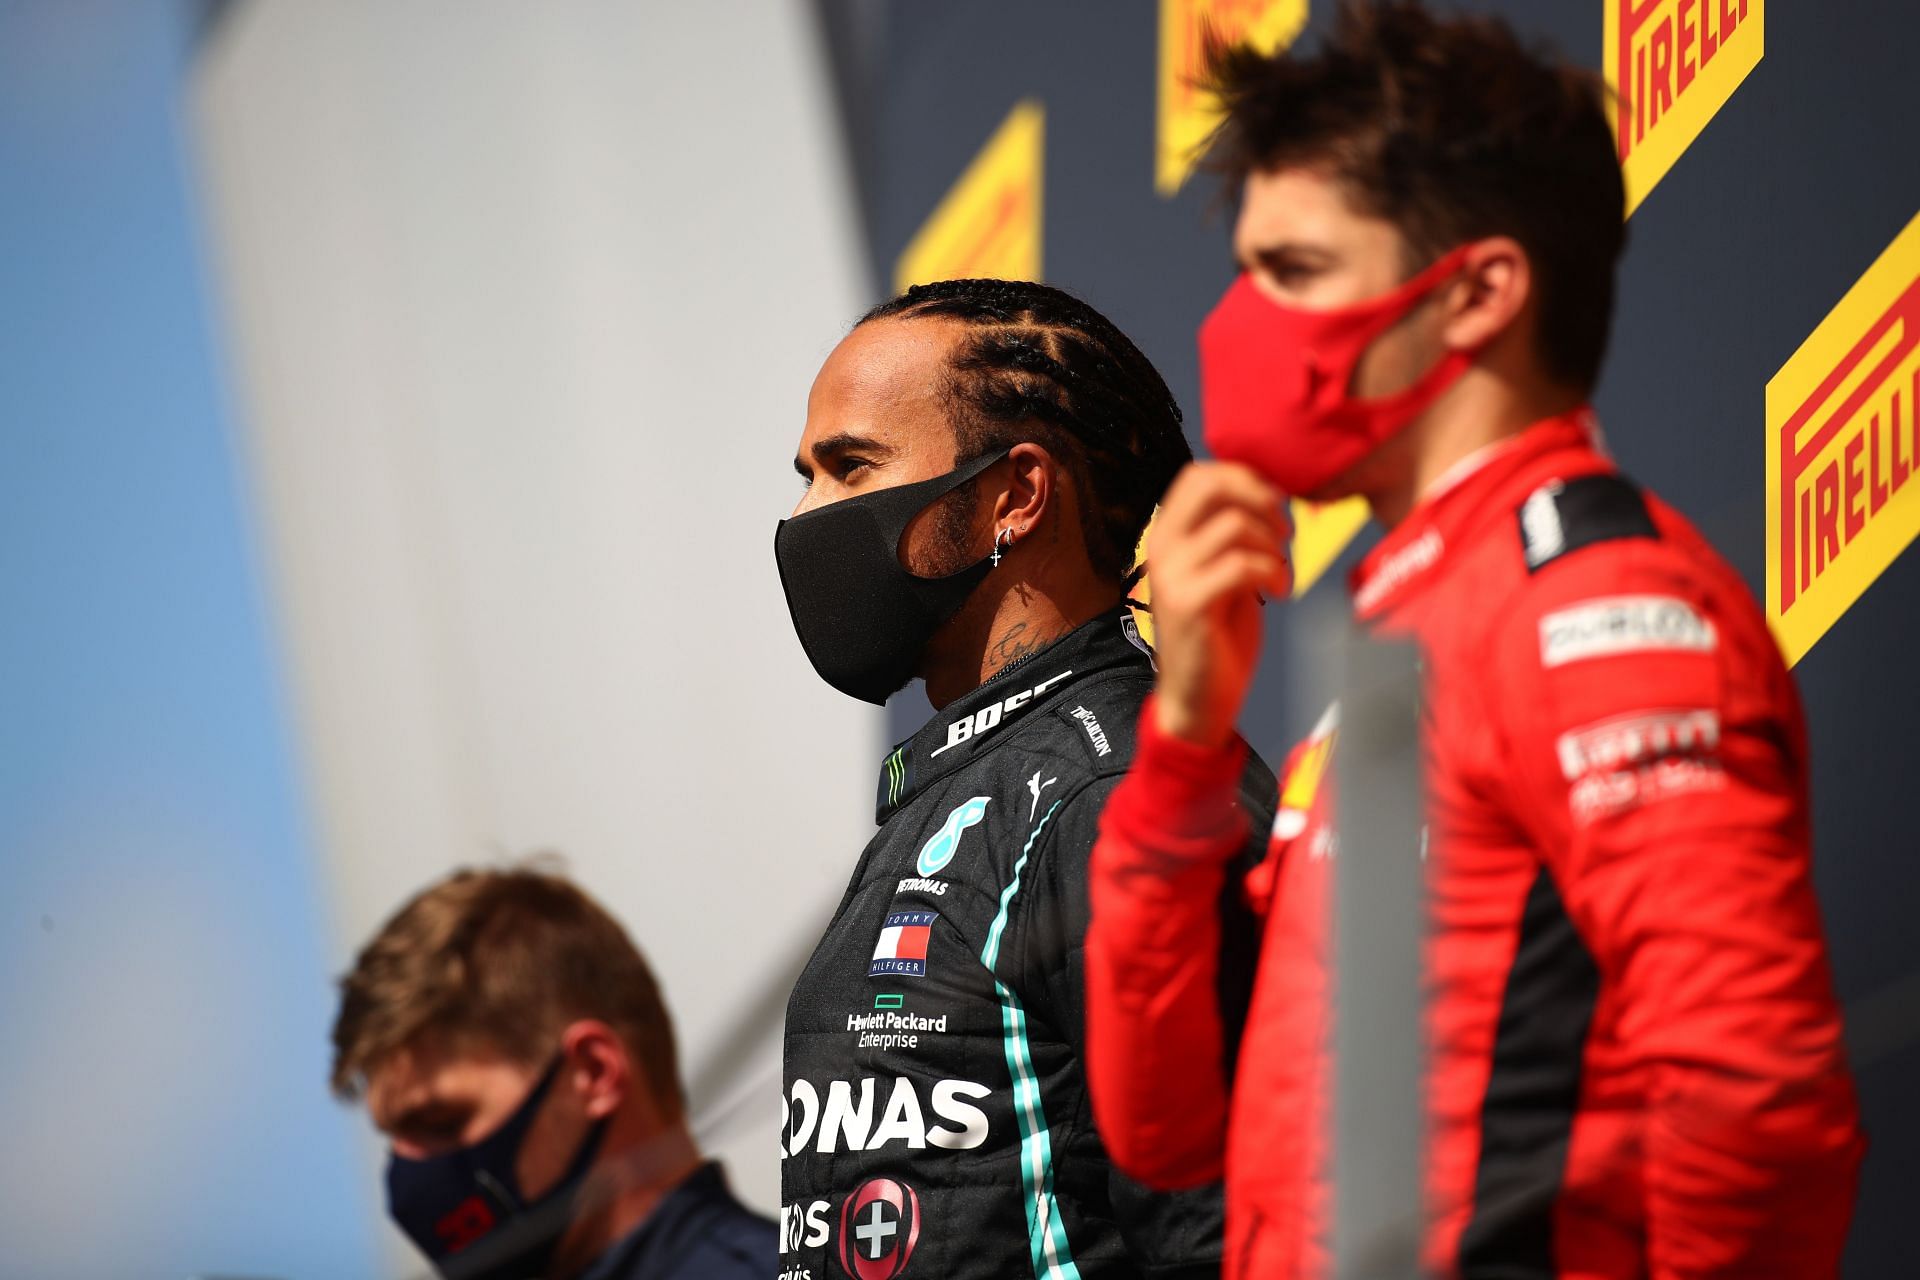 F1 Grand Prix of Great Britain - Lewis Hamilton (center) shares the podium with Max Verstappen (left) and Charles Leclerc (right)